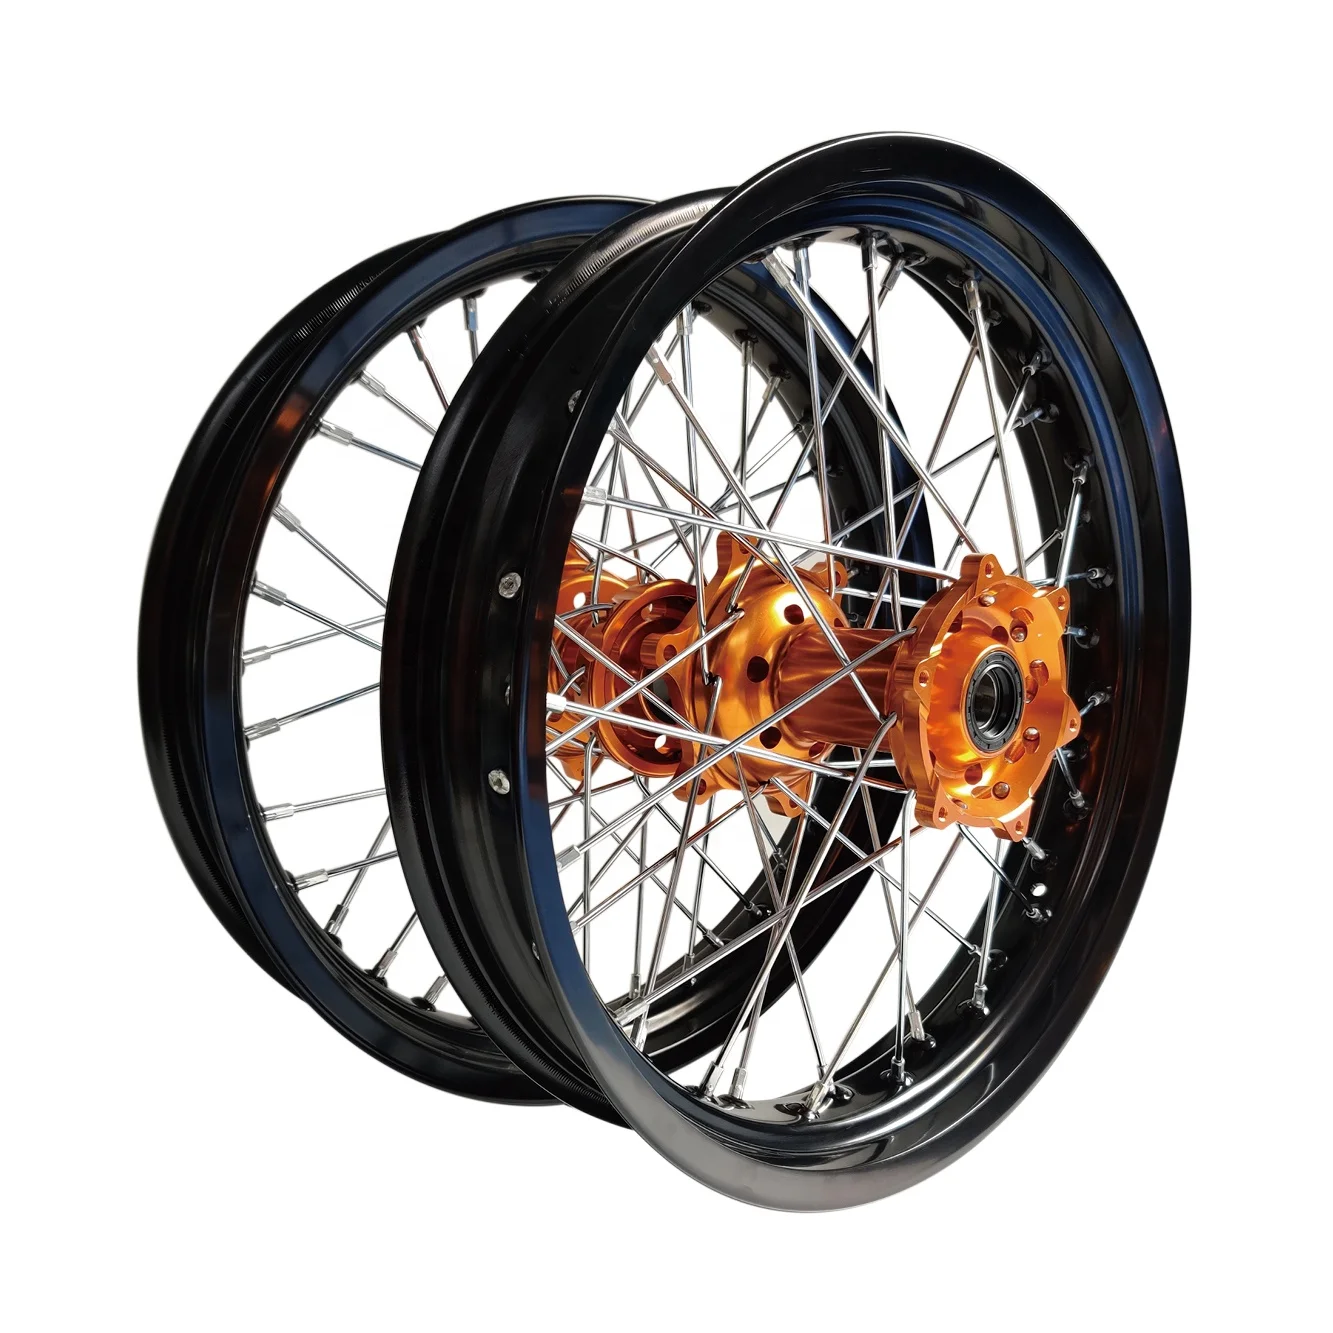 Customized 2.50-17 and 3.00x17 inch motorcycle alloy spoked wheels for SX250 Complete Wheel with Billet Hub